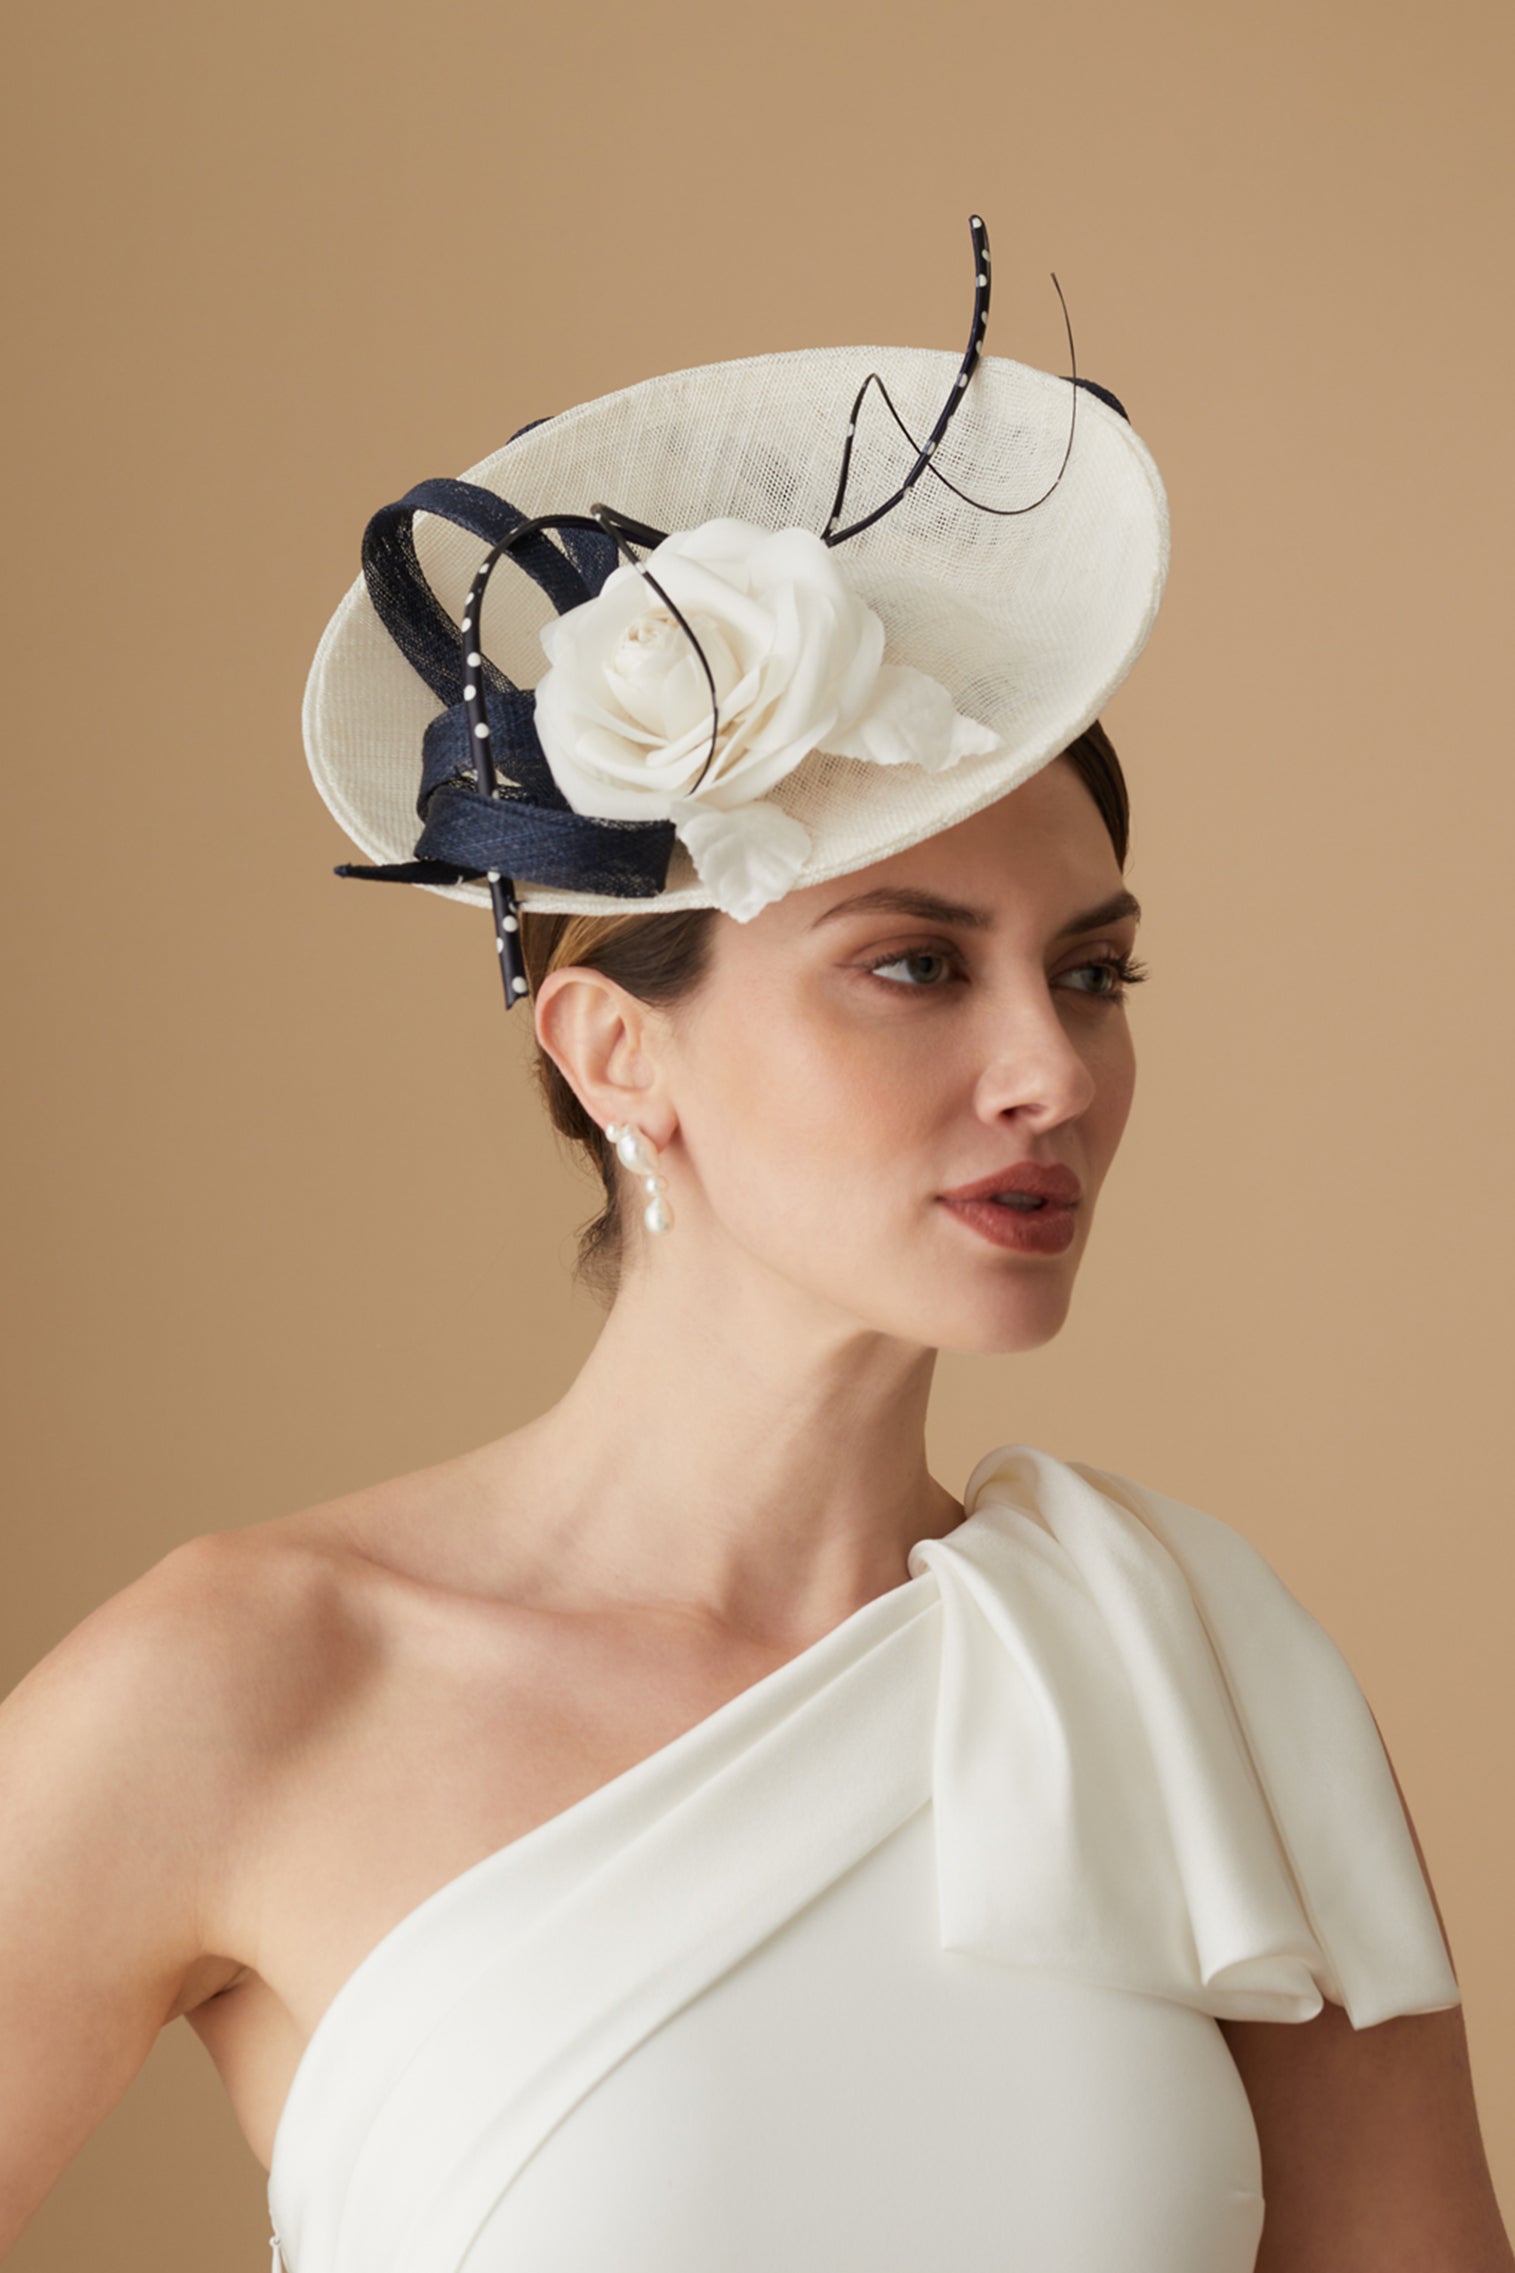 Assam White and Navy Saucer Hat - Women’s Hats - Lock & Co. Hatters London UK